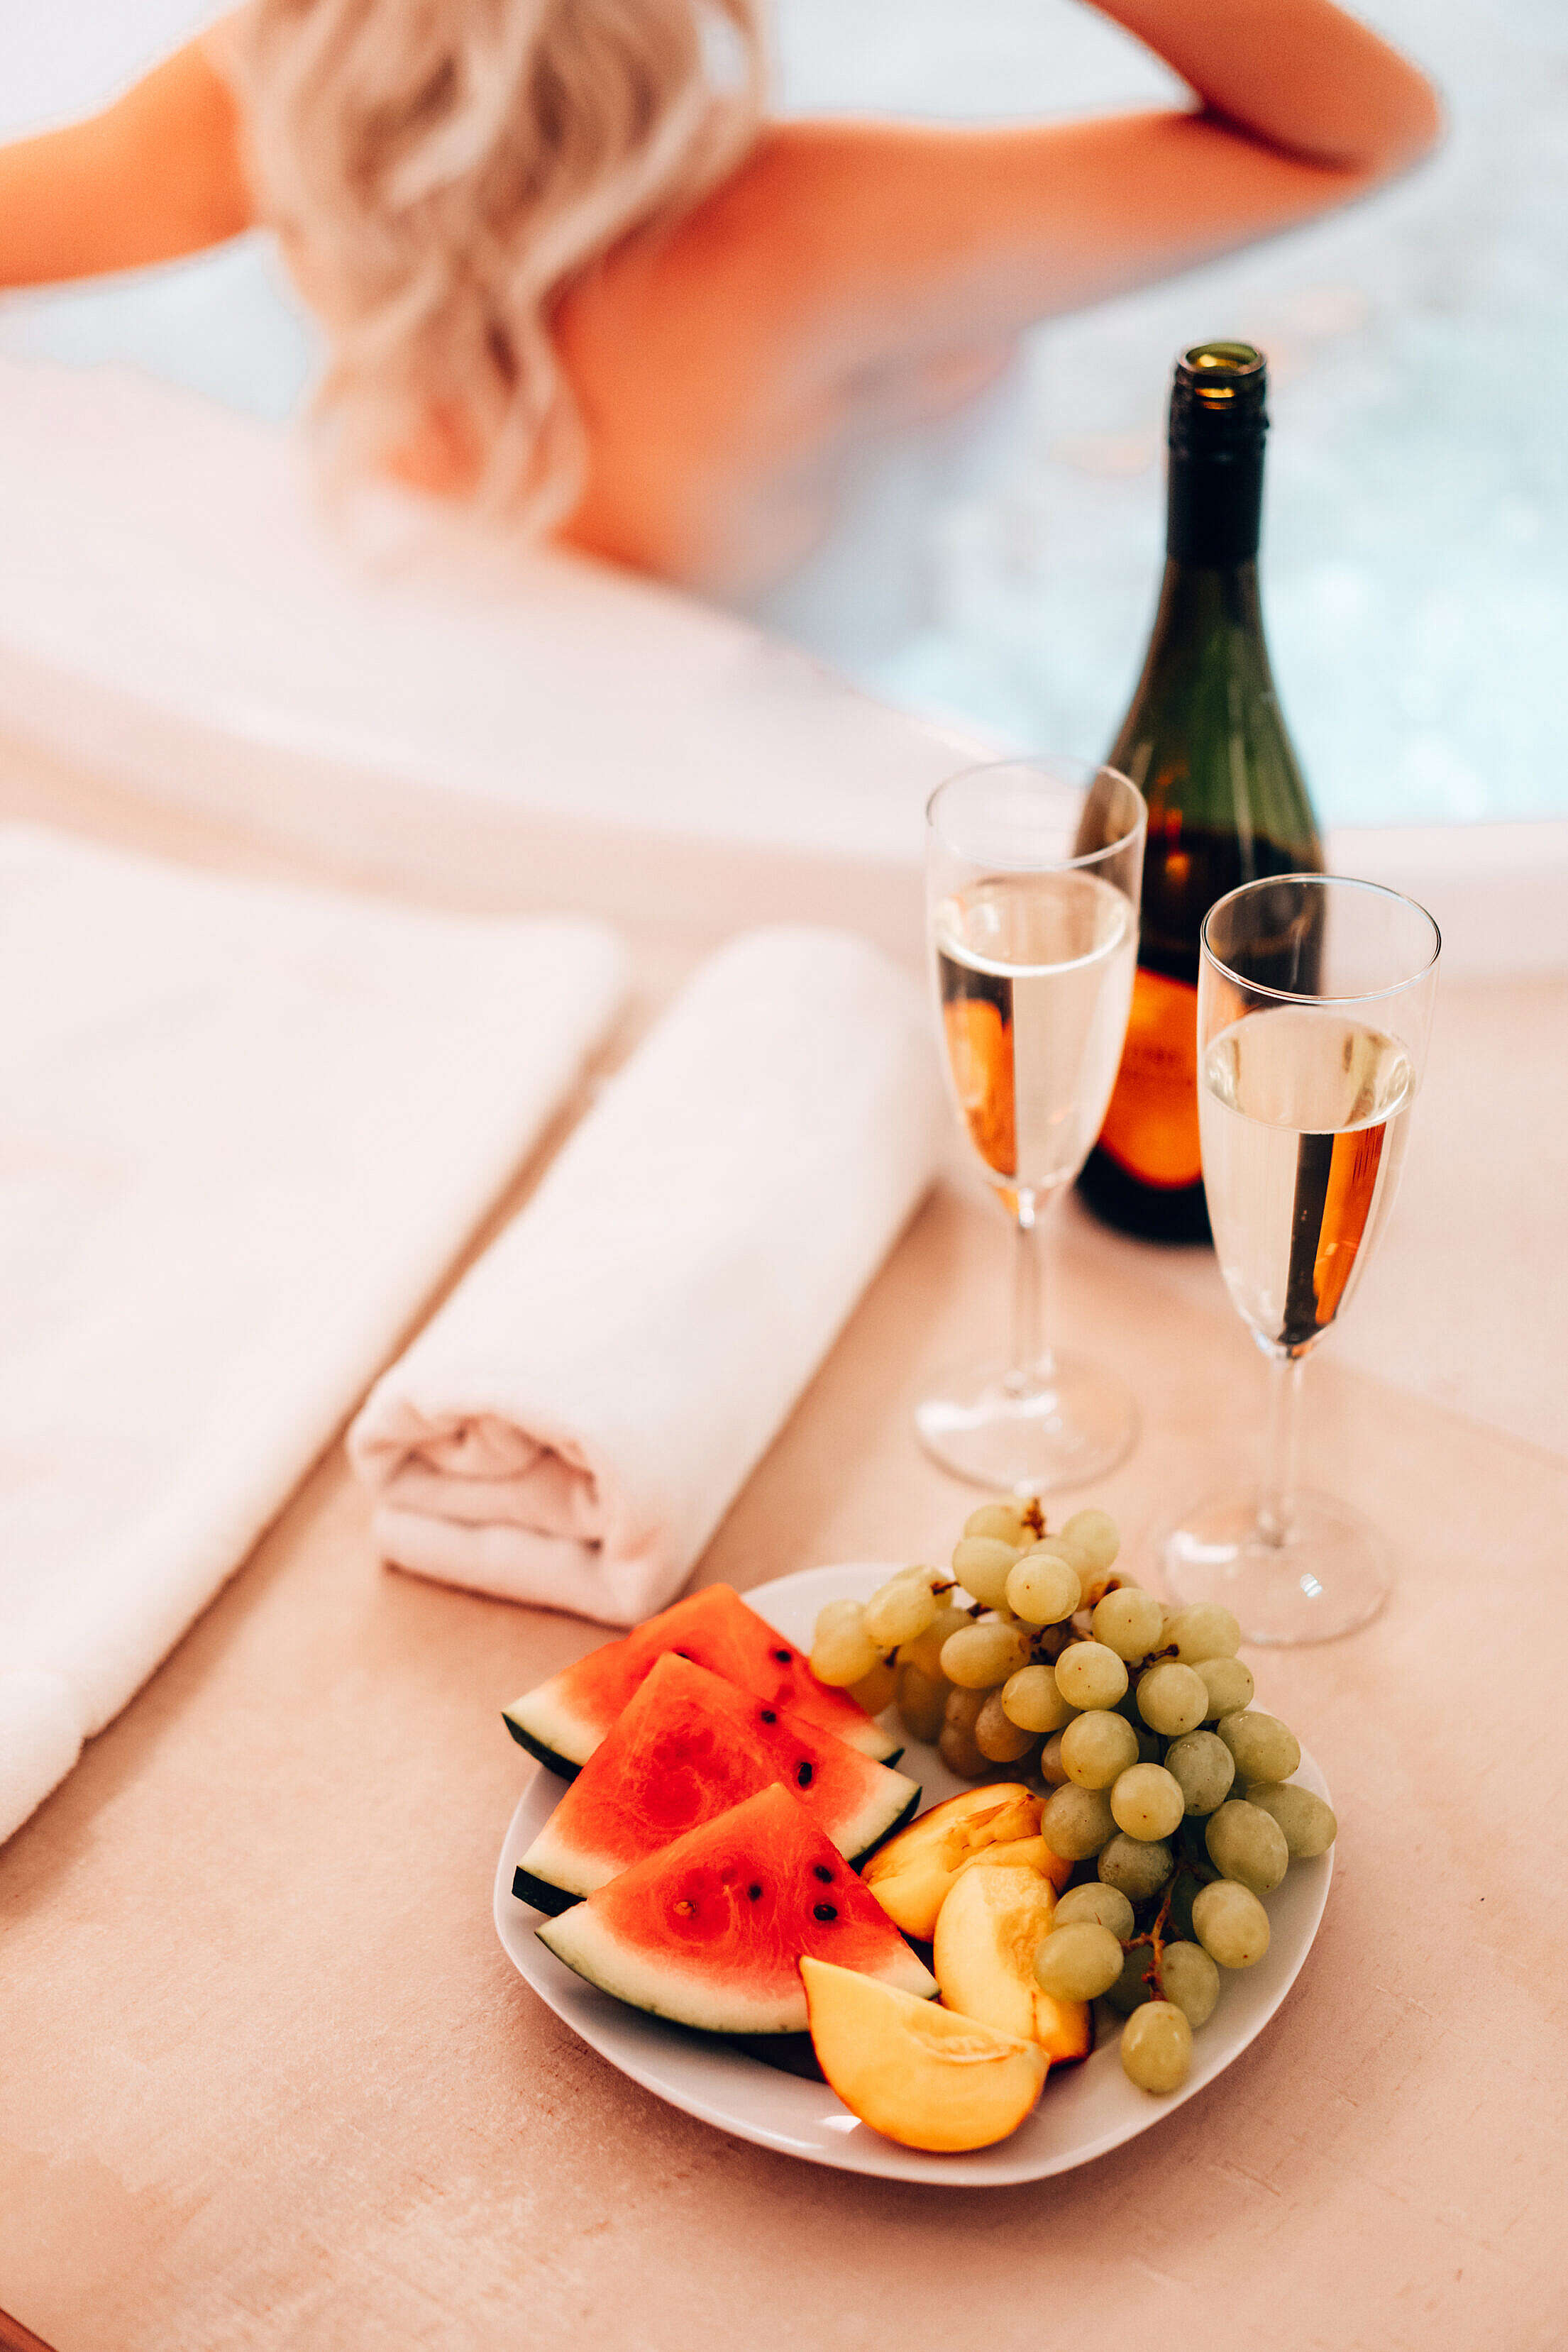 Prosecco and Fresh Fruits in a Private Spa Free Stock Photo